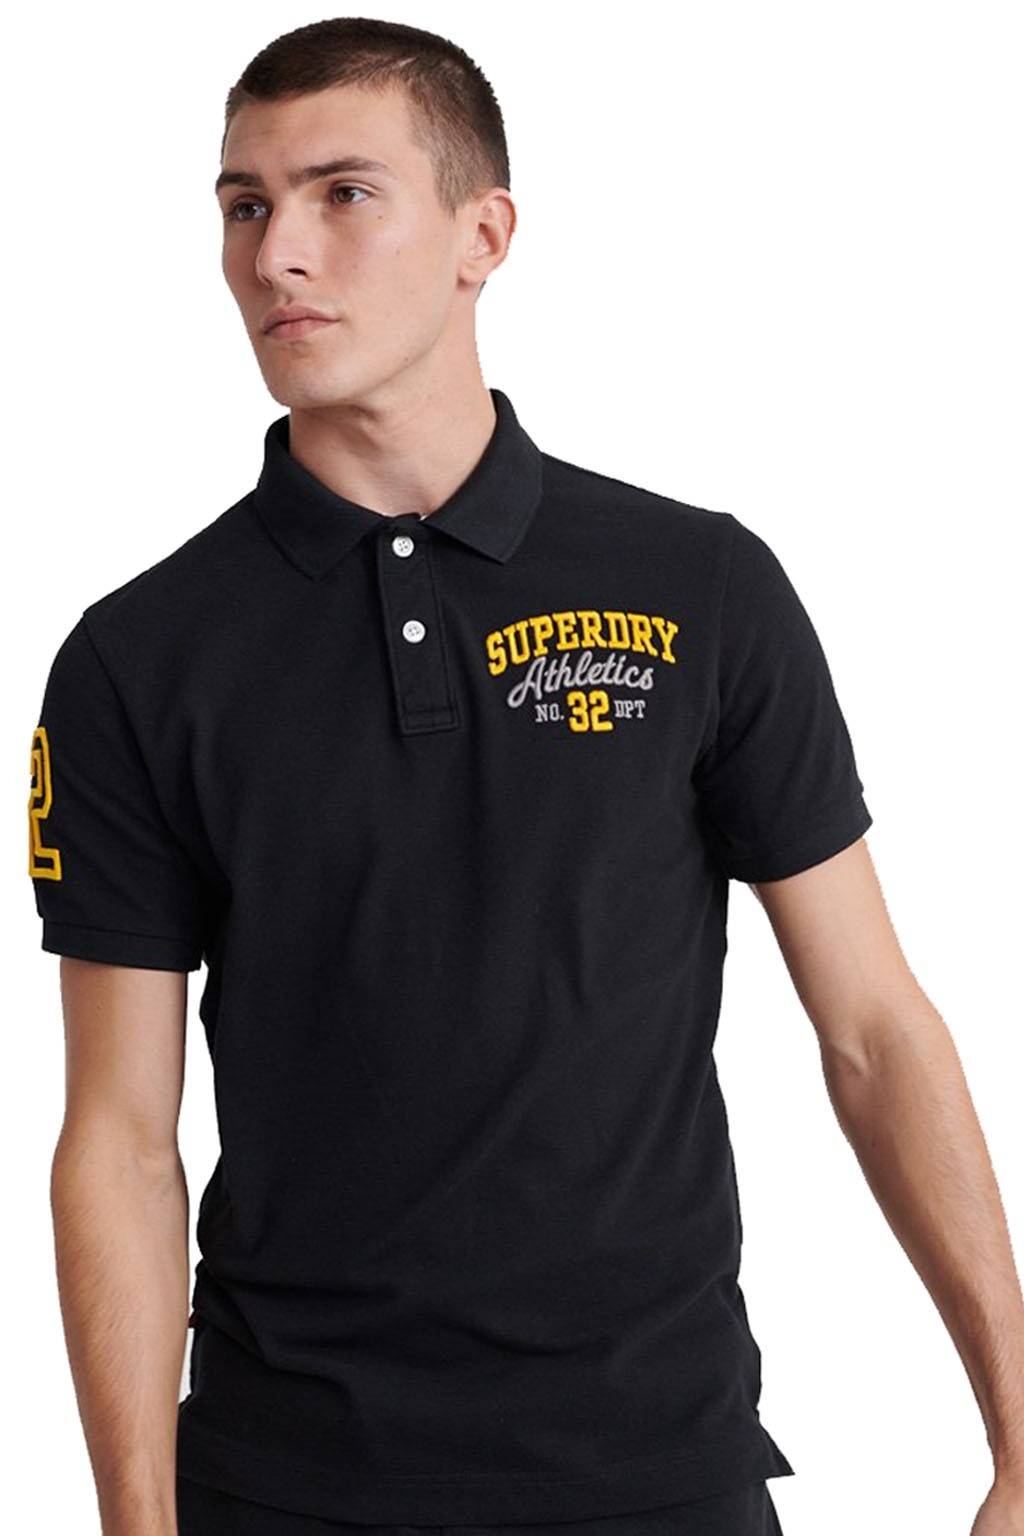 SUPERDRY CLASSIC SUPERSTATE POLO